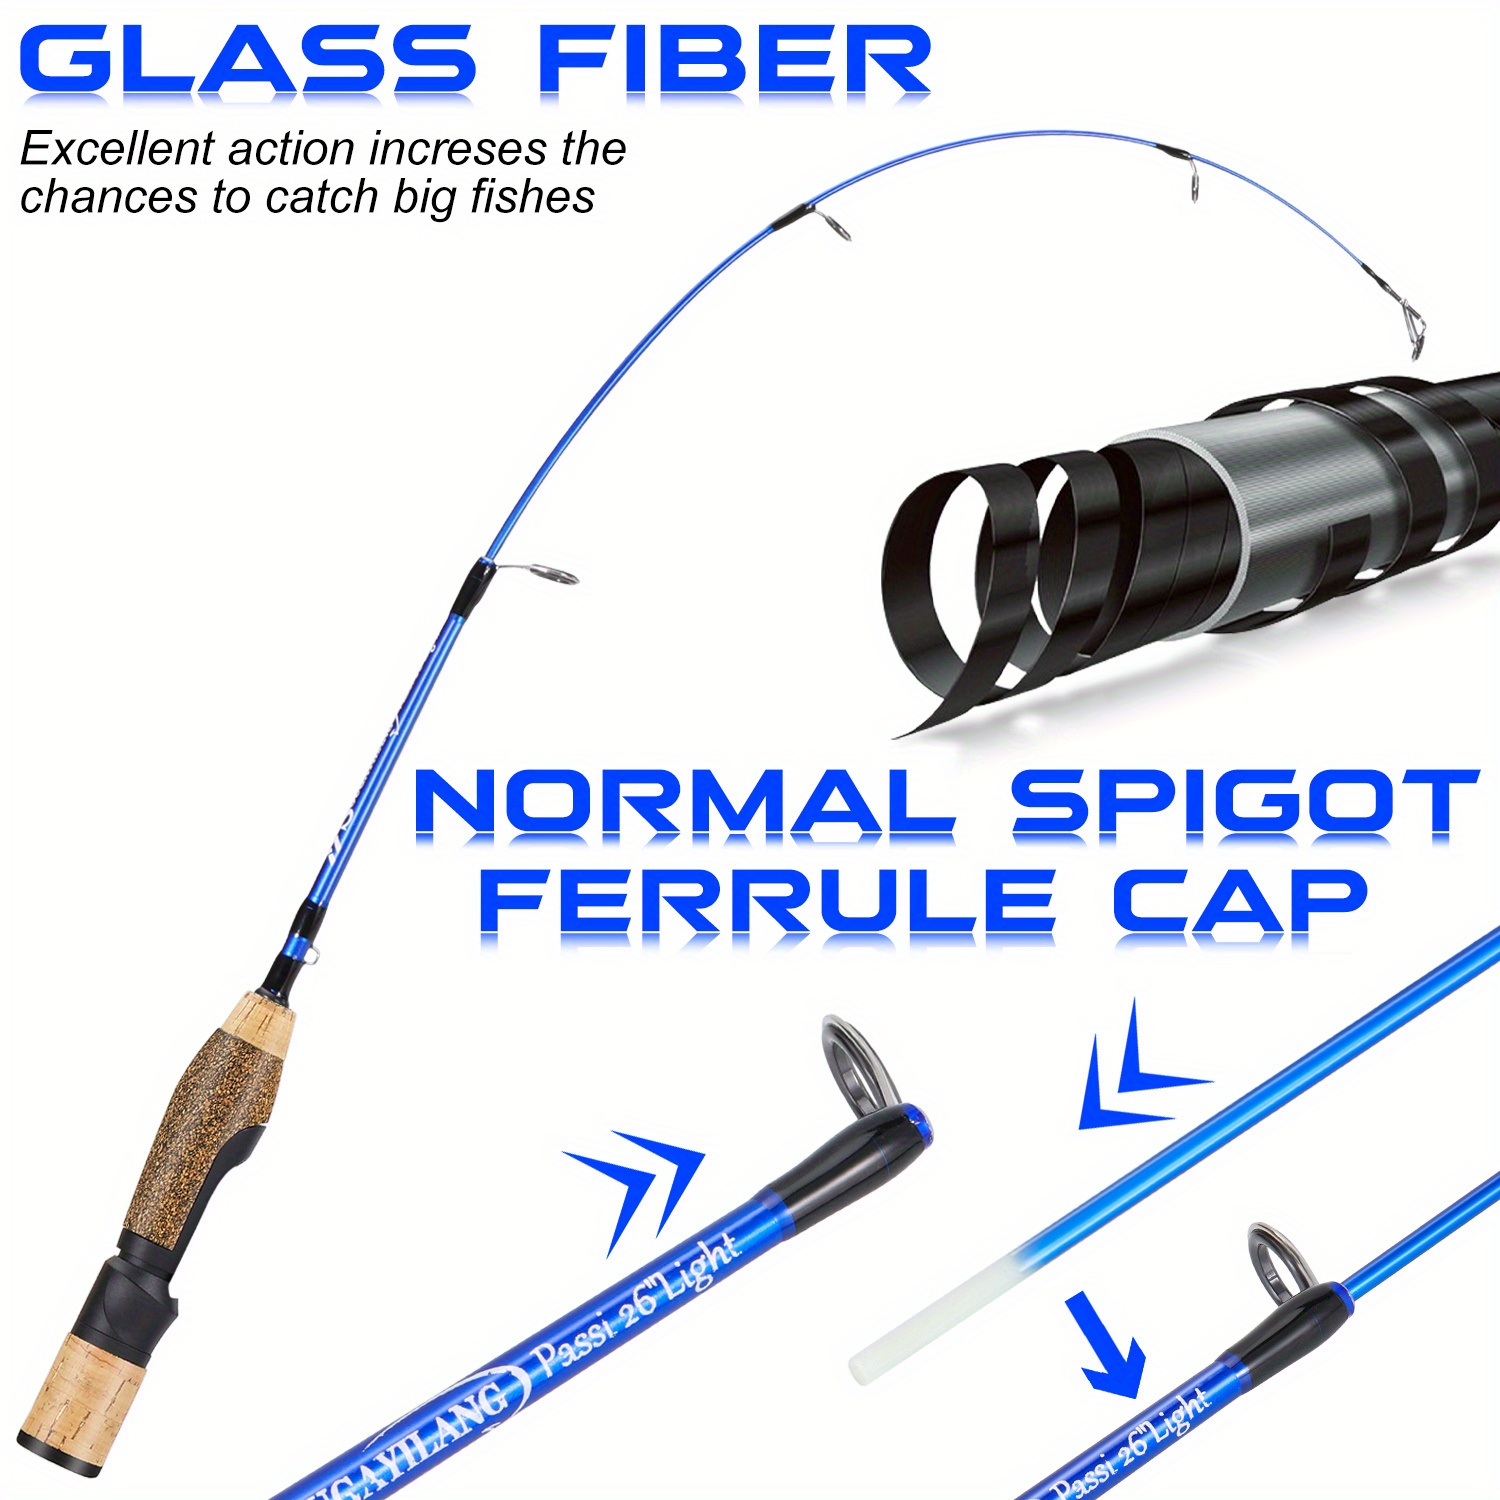 Sougayilang 2 section Ice Fishing Rod Anglers Two Power Med. - Temu